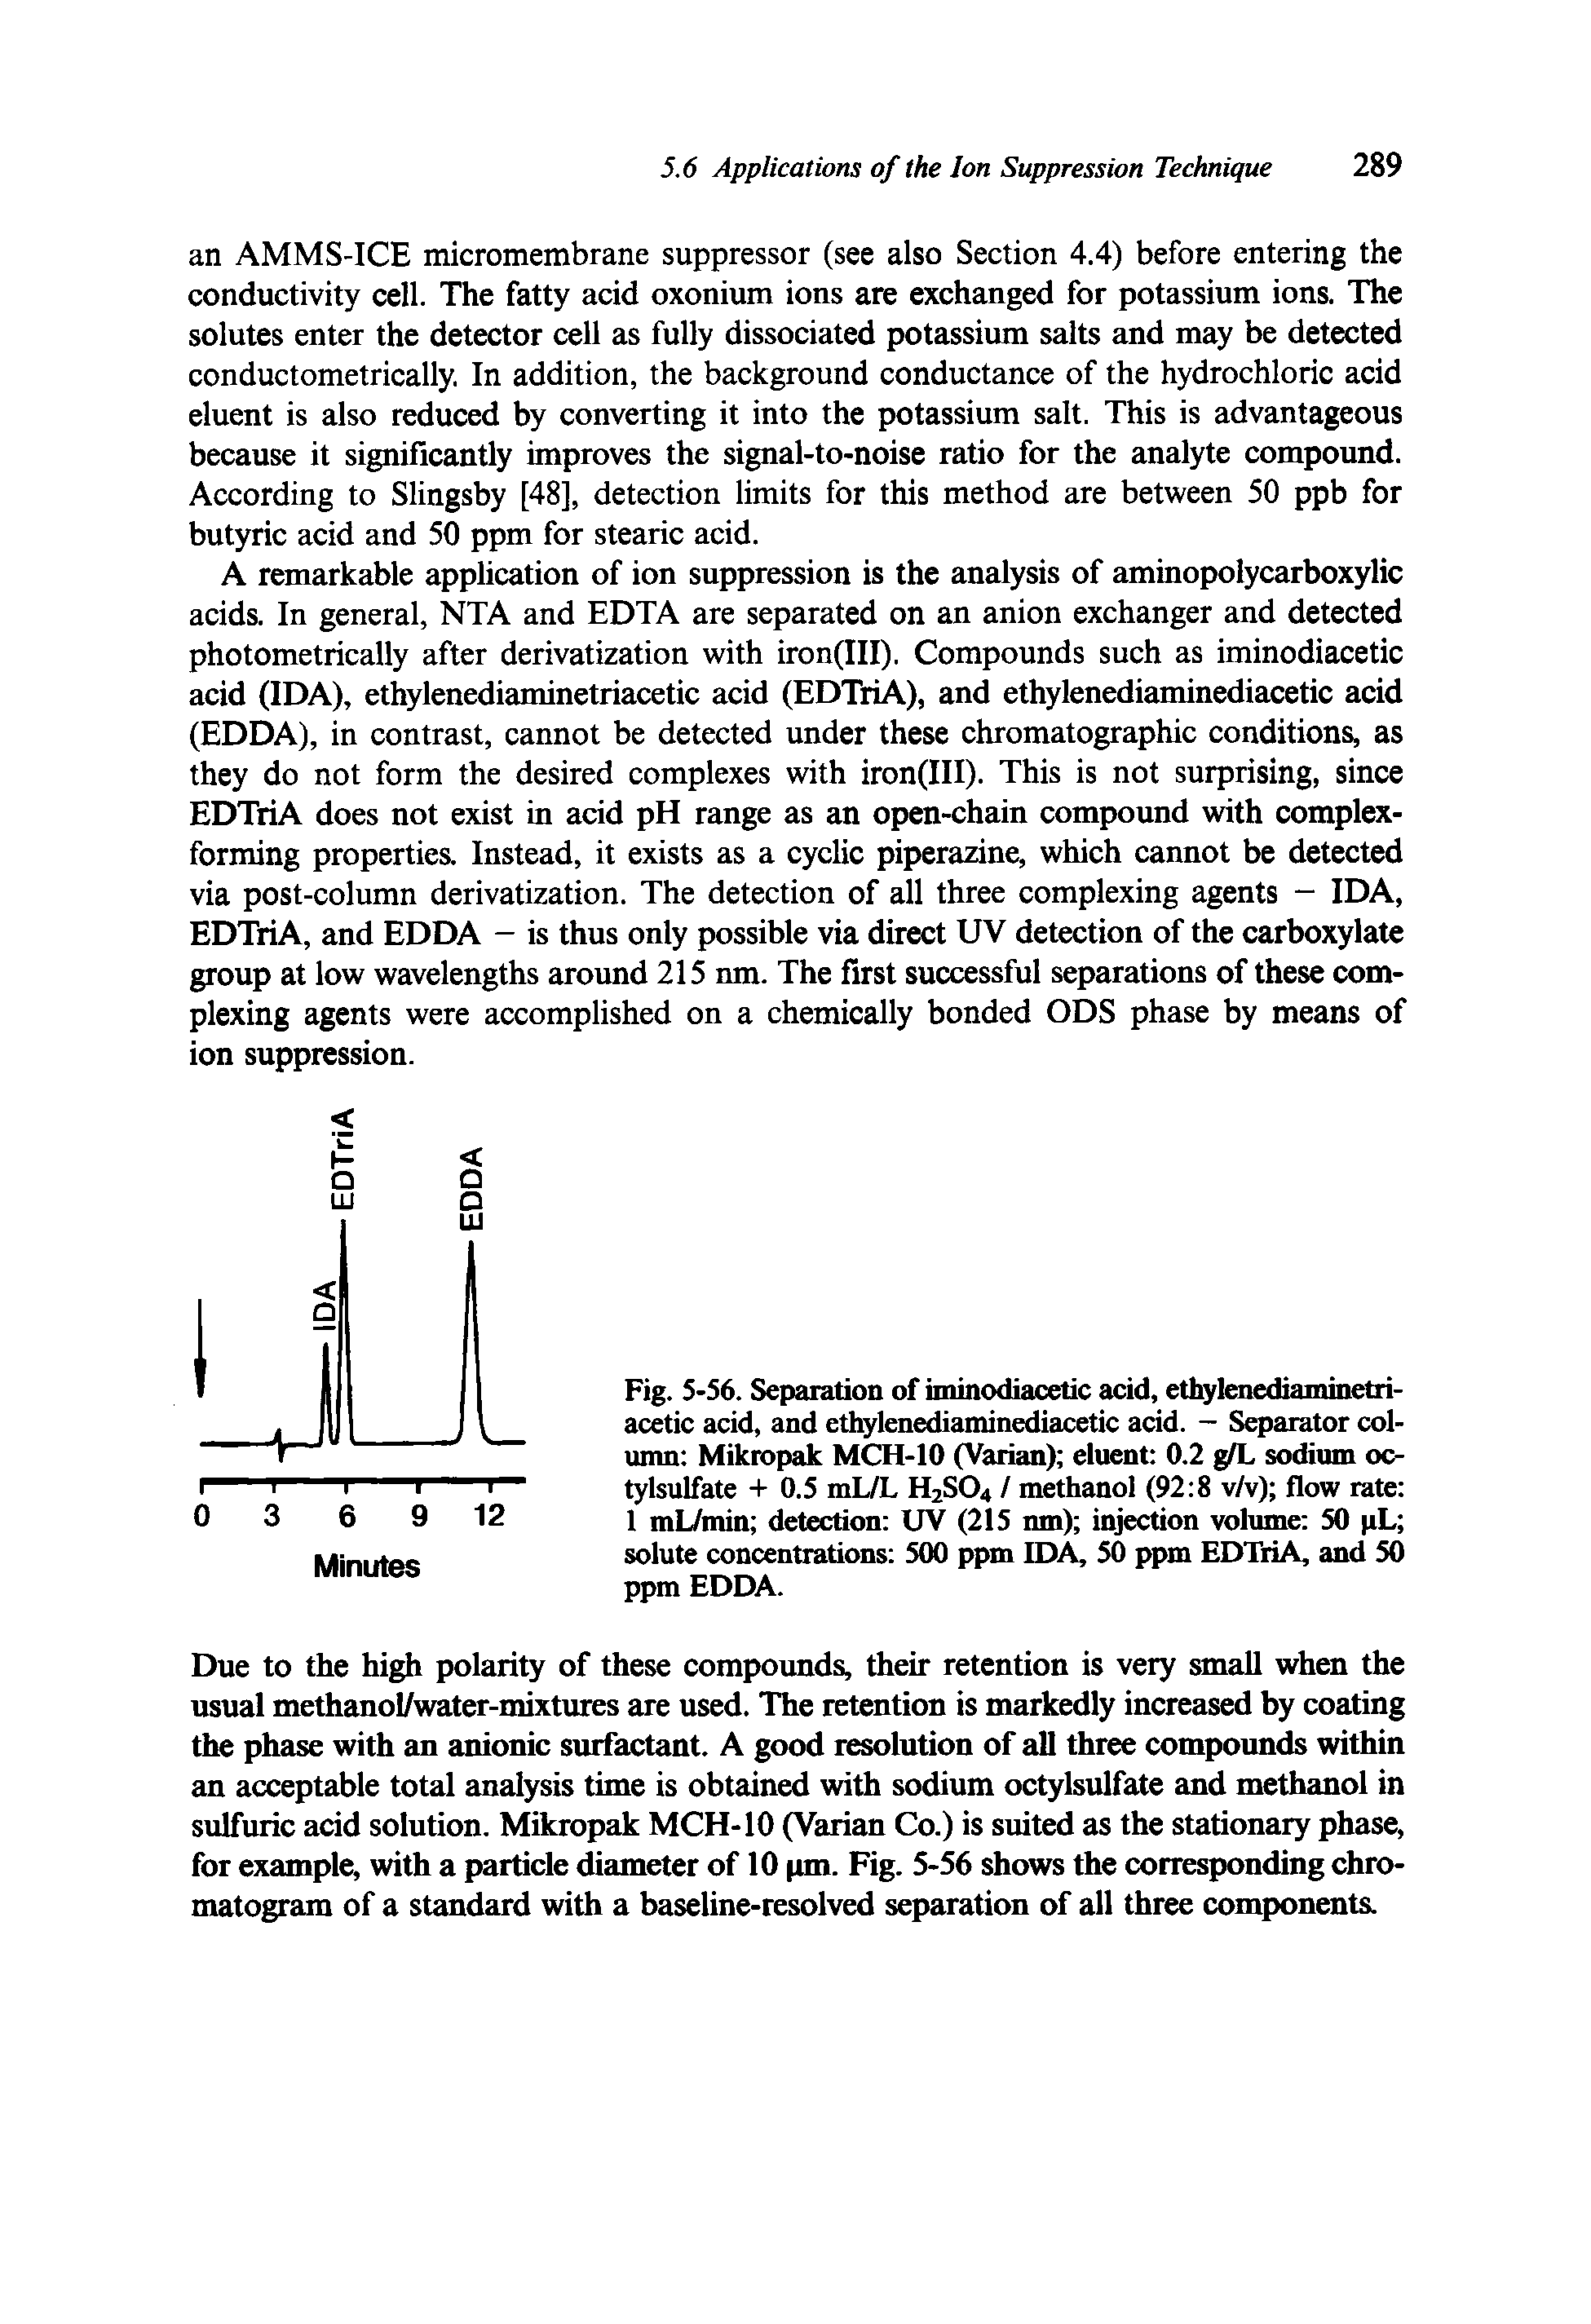 Fig. 5-56. Separation of iminodiacetic acid, ethylenediaminetriacetic acid, and ethylenediaminediacetic acid. - Separator column Mikropak MCH-10 (Varian) eluent 0.2 g/L sodium oc-tylsulfate + 0.5 mL/L H2S04 / methanol (92 8 v/v) flow rate 1 mL/min detection UV (215 nm) injection volume 50 pL solute concentrations 500 ppm IDA, 50 ppm EDTriA, and 50 ppm EDDA.